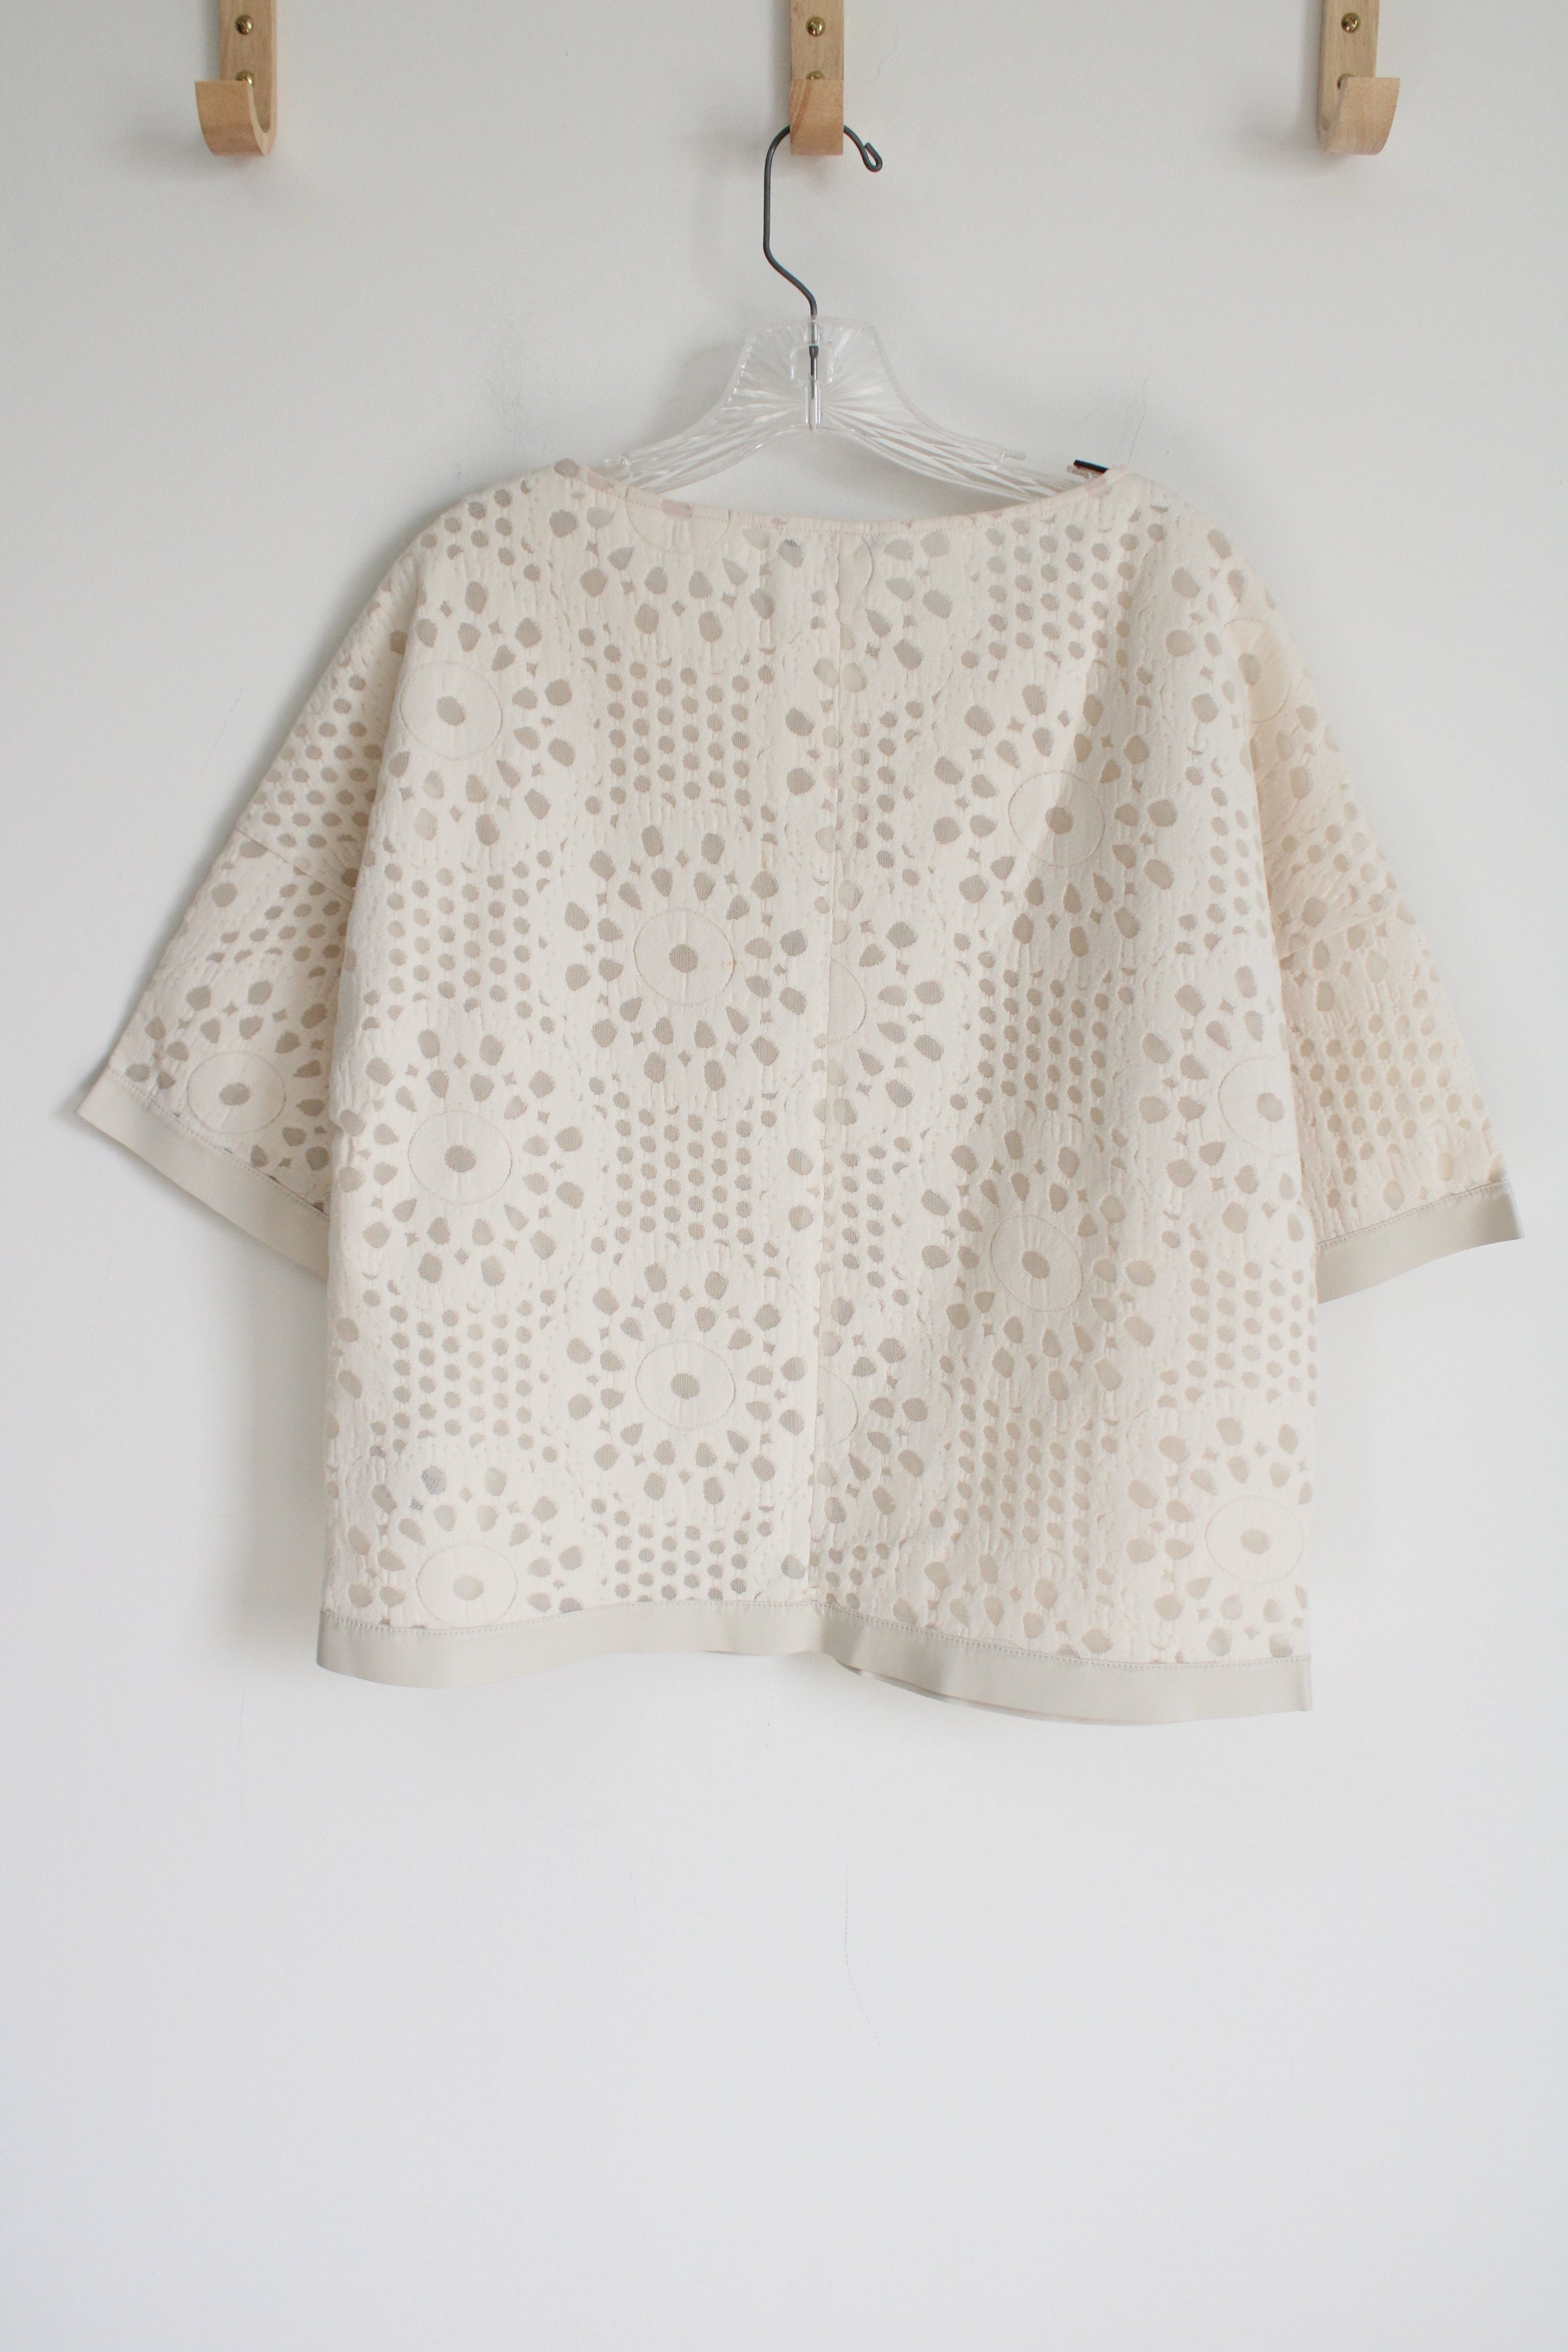 Lafayette 148 Ivory Short Sleeved Top | M